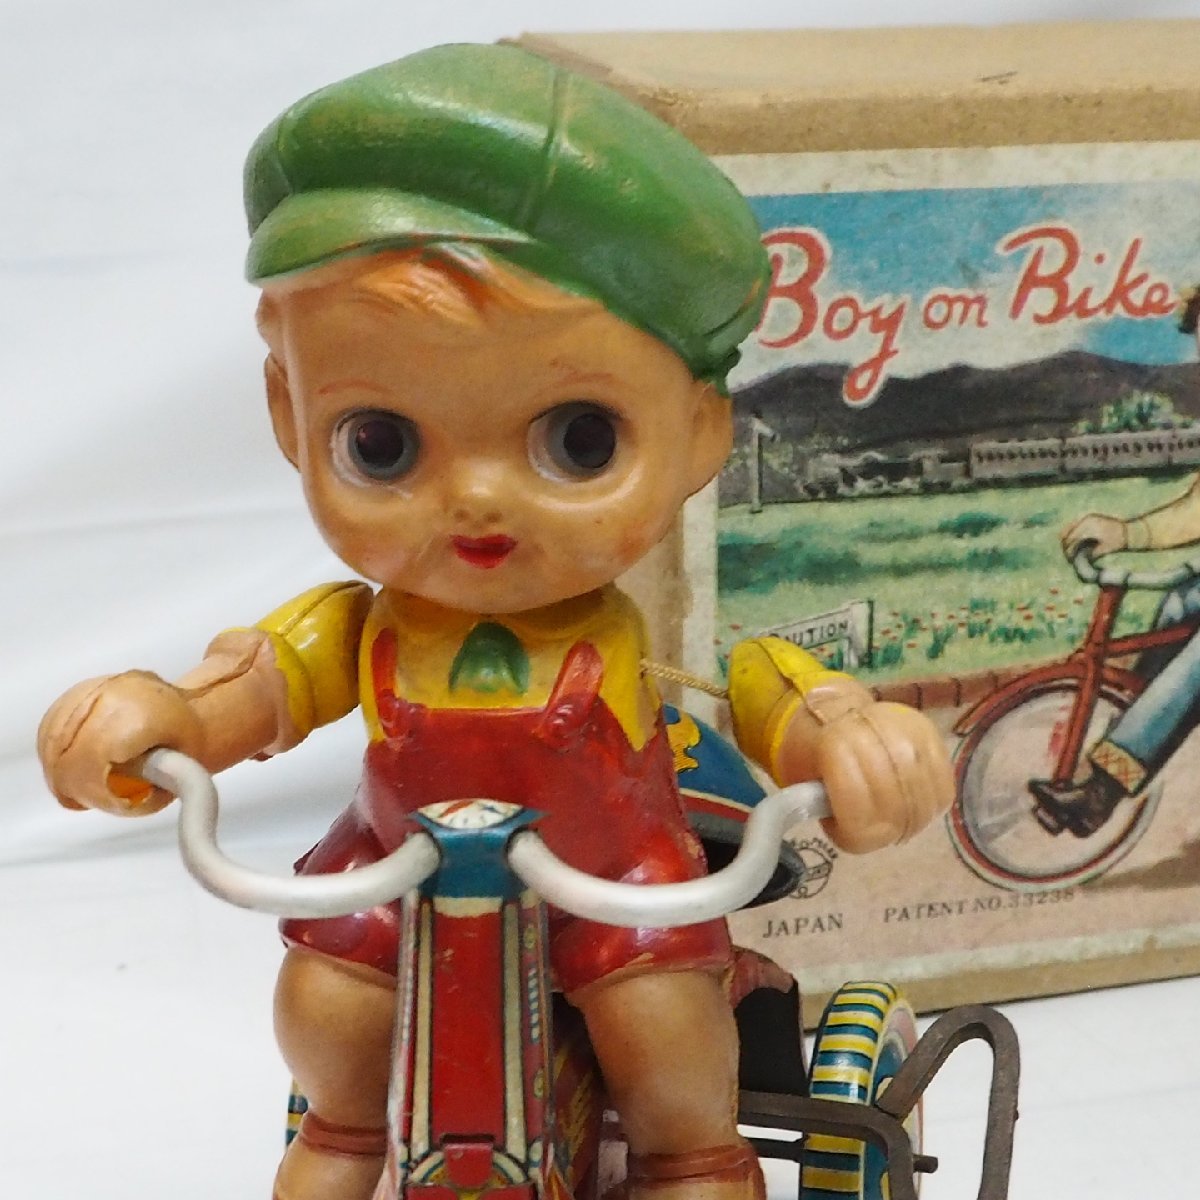  cell Lloyd doll tin plate tricycle middle size [Boy on BIikezen my bike ] made in Japan tin toy car#SUZUKI Suzuki [ box attaching ] including carriage 